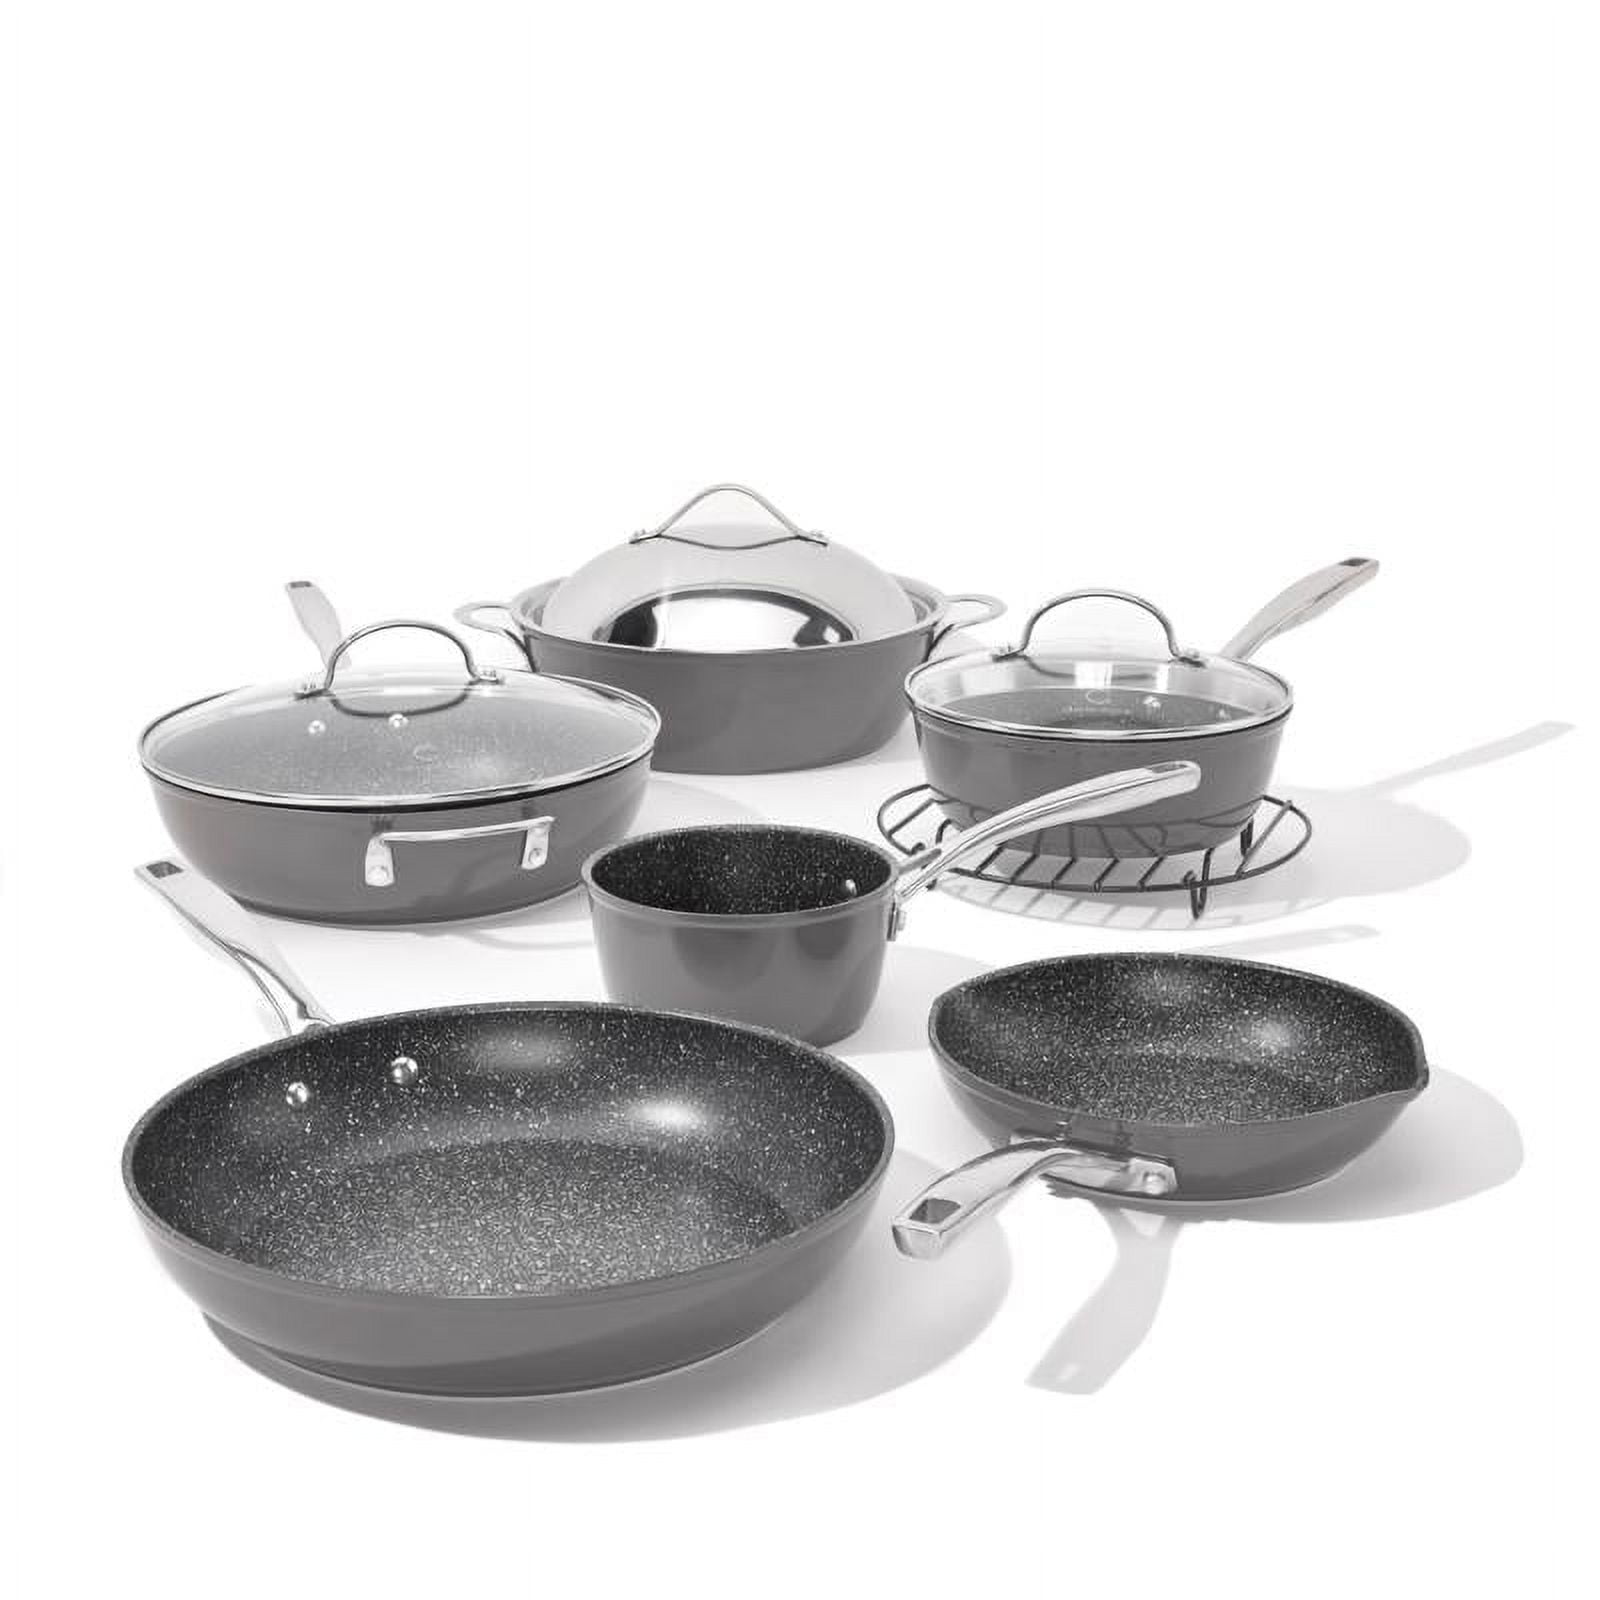 Kitchen - Cookware - Cookware Sets - Curtis Stone Dura-Pan 14-Piece Cookware  Set - Online Shopping for Canadians